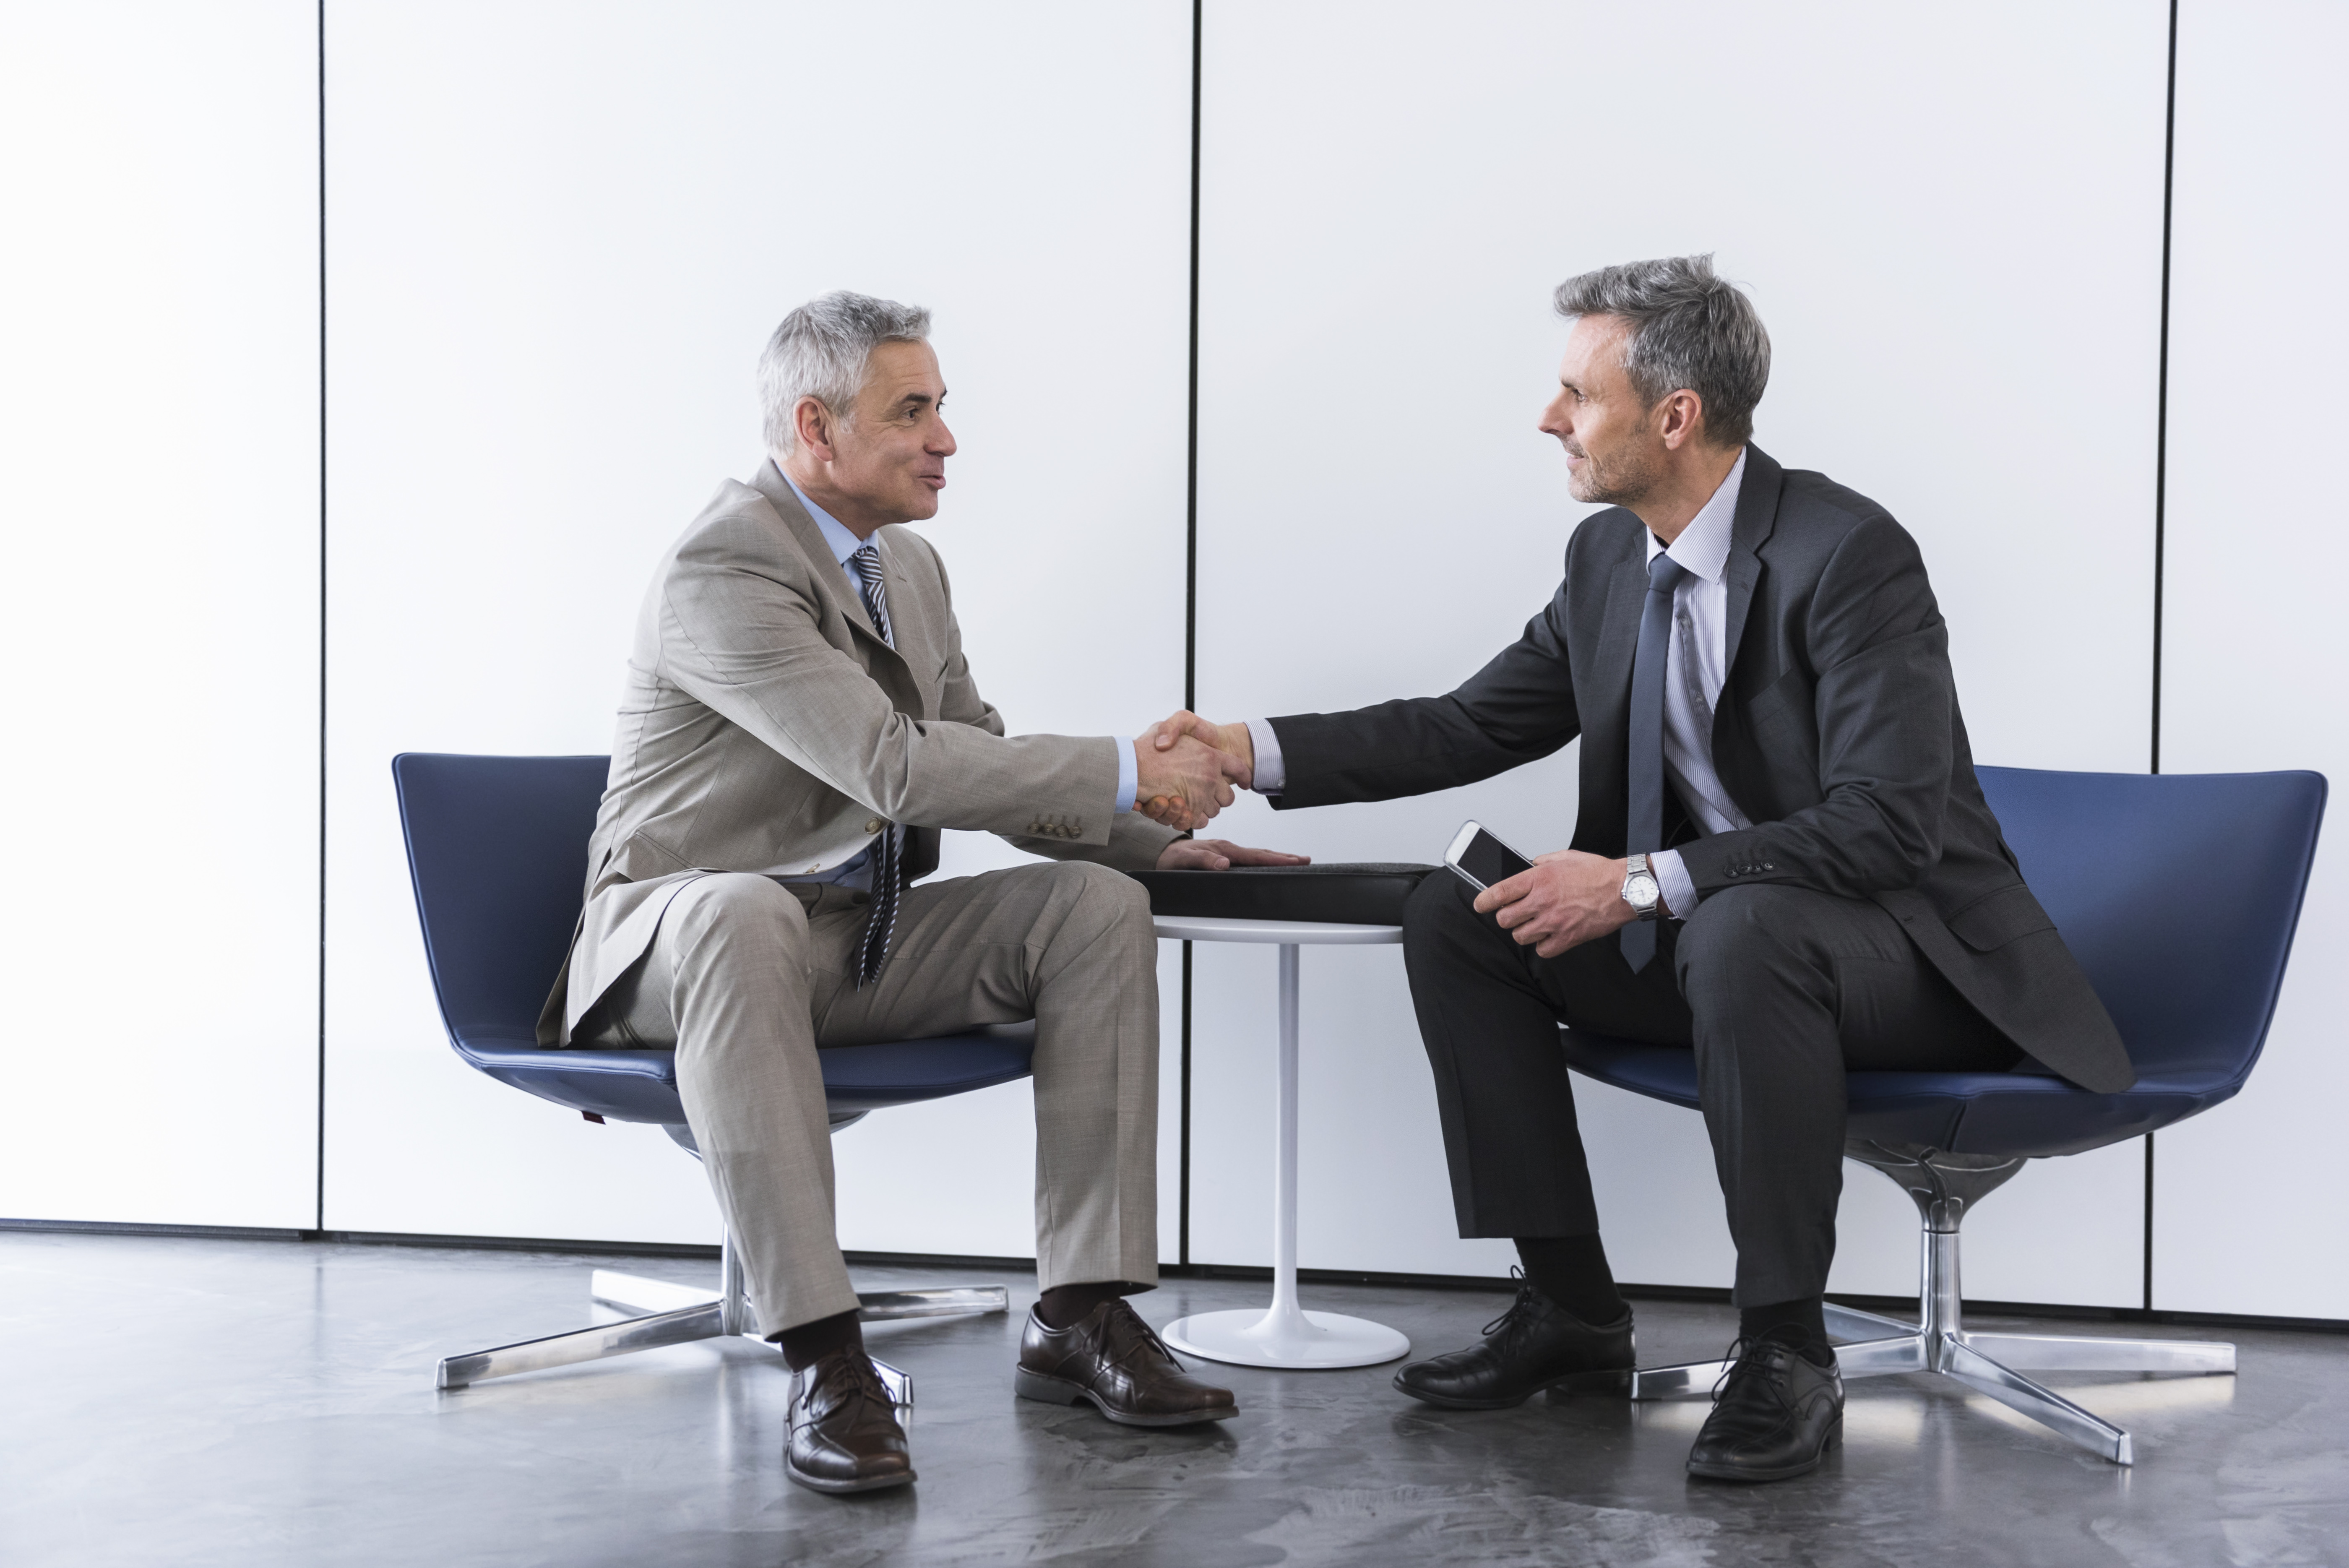 Two businessmen in formal dress shaking hands during negotiations in an office.